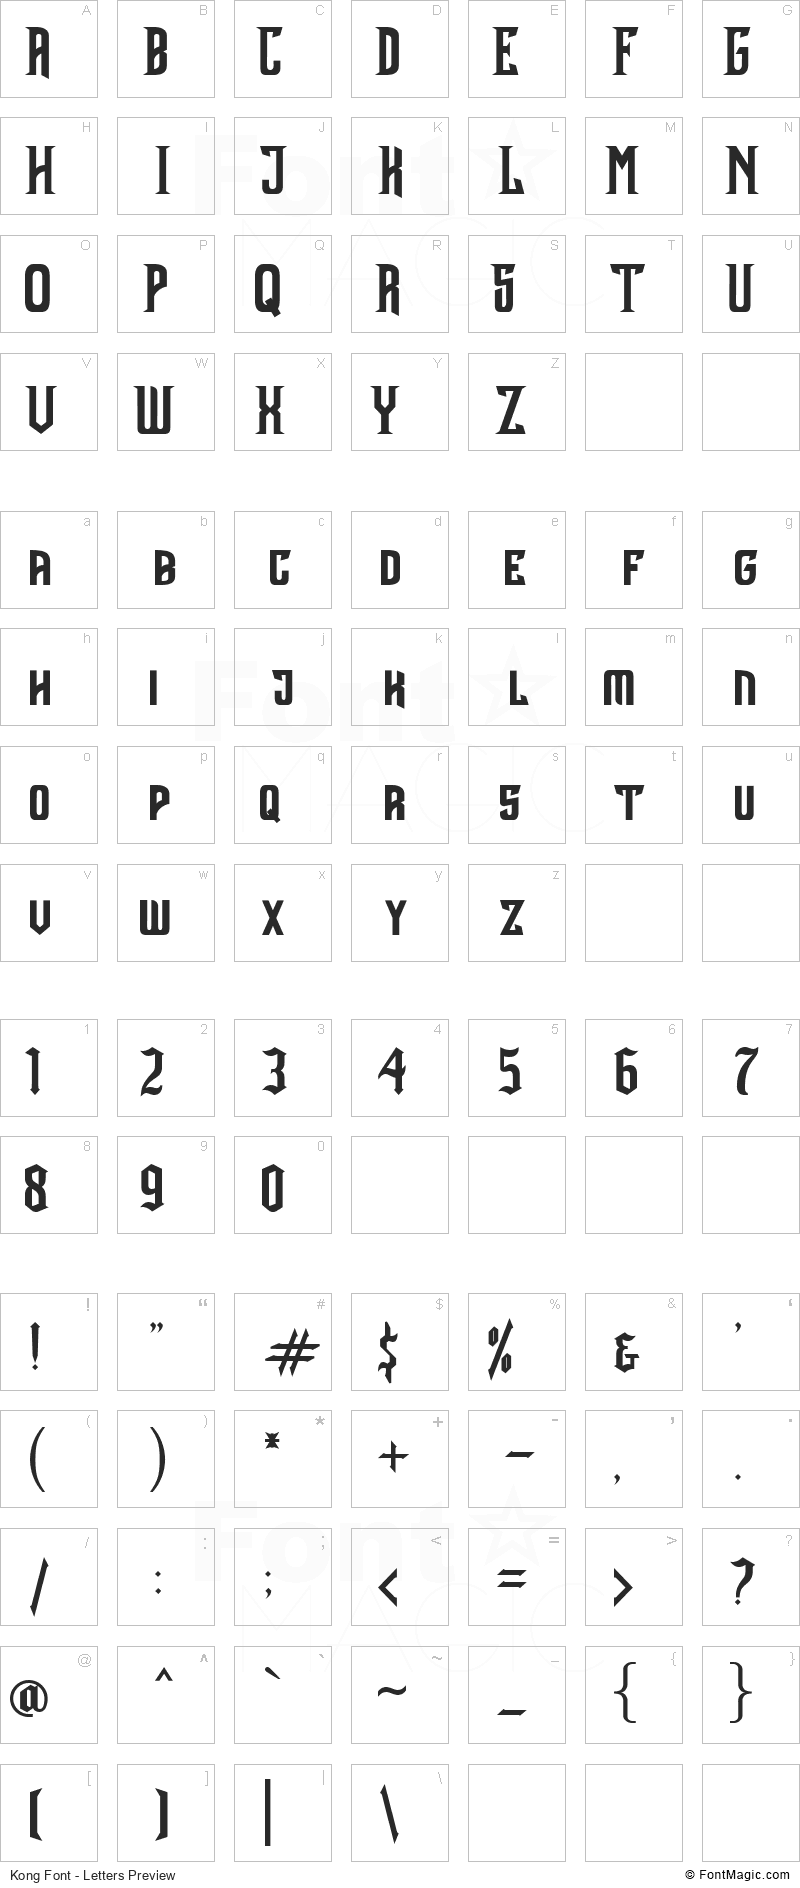 Kong Font - All Latters Preview Chart